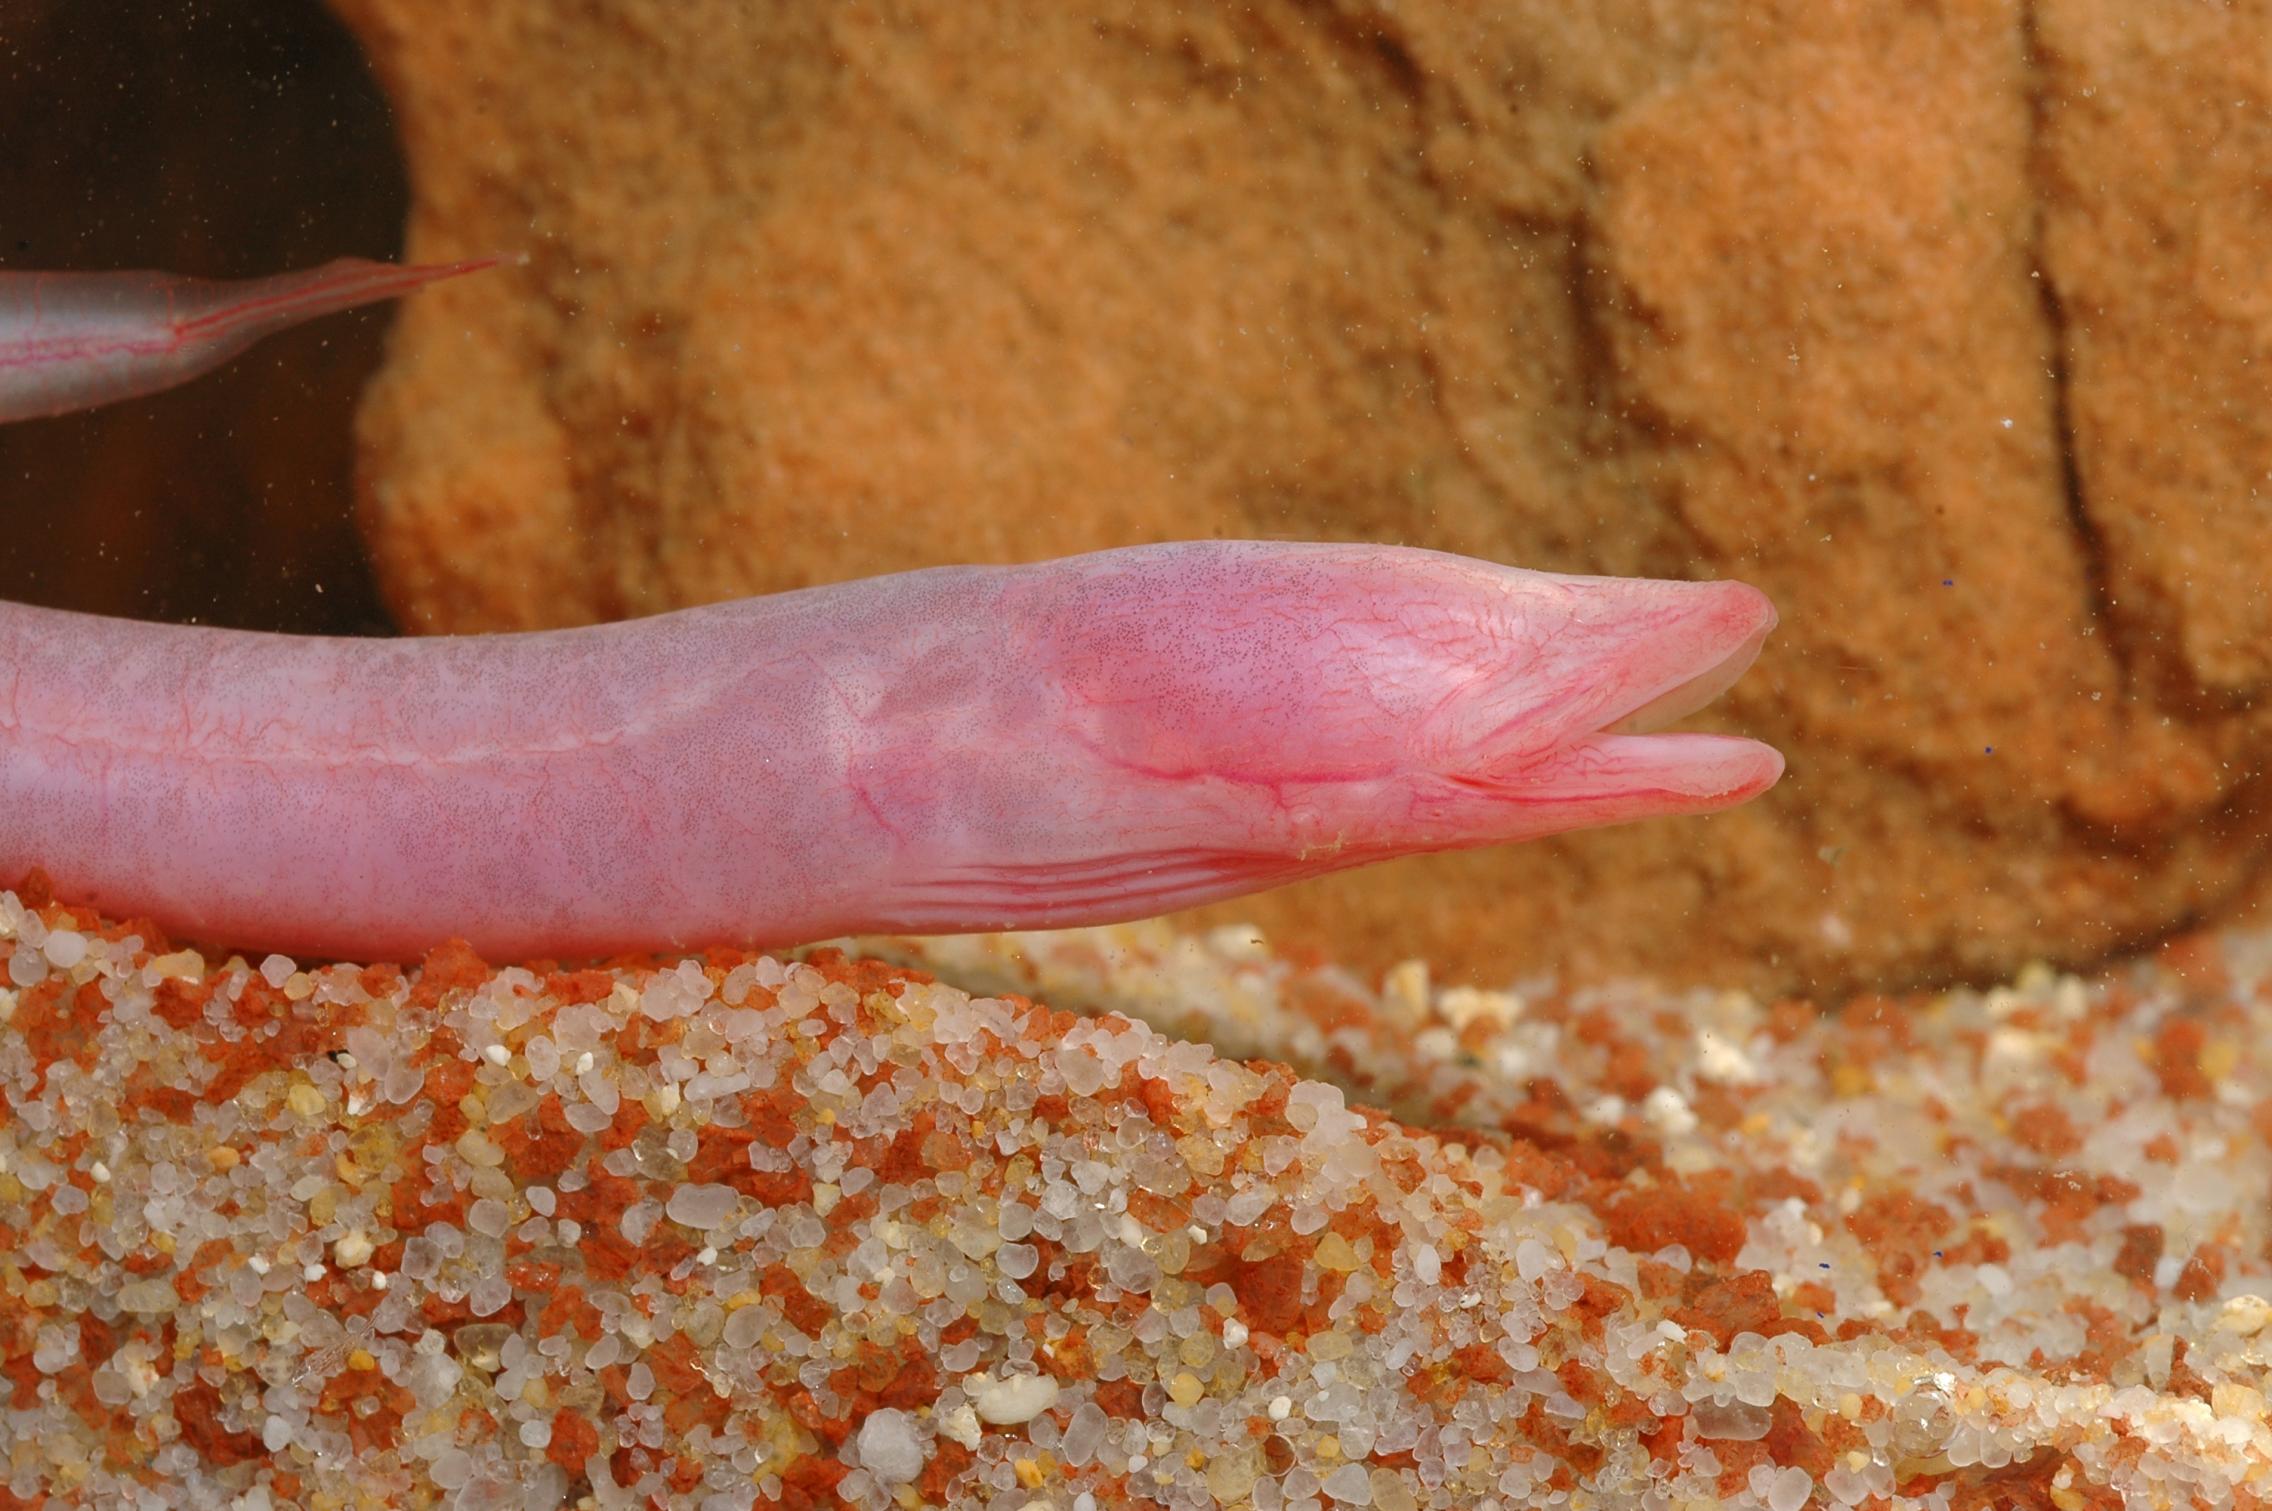 The Blind Cave Eel is the largest of three cavefish species known from Australia, growing up to 40cm long. 